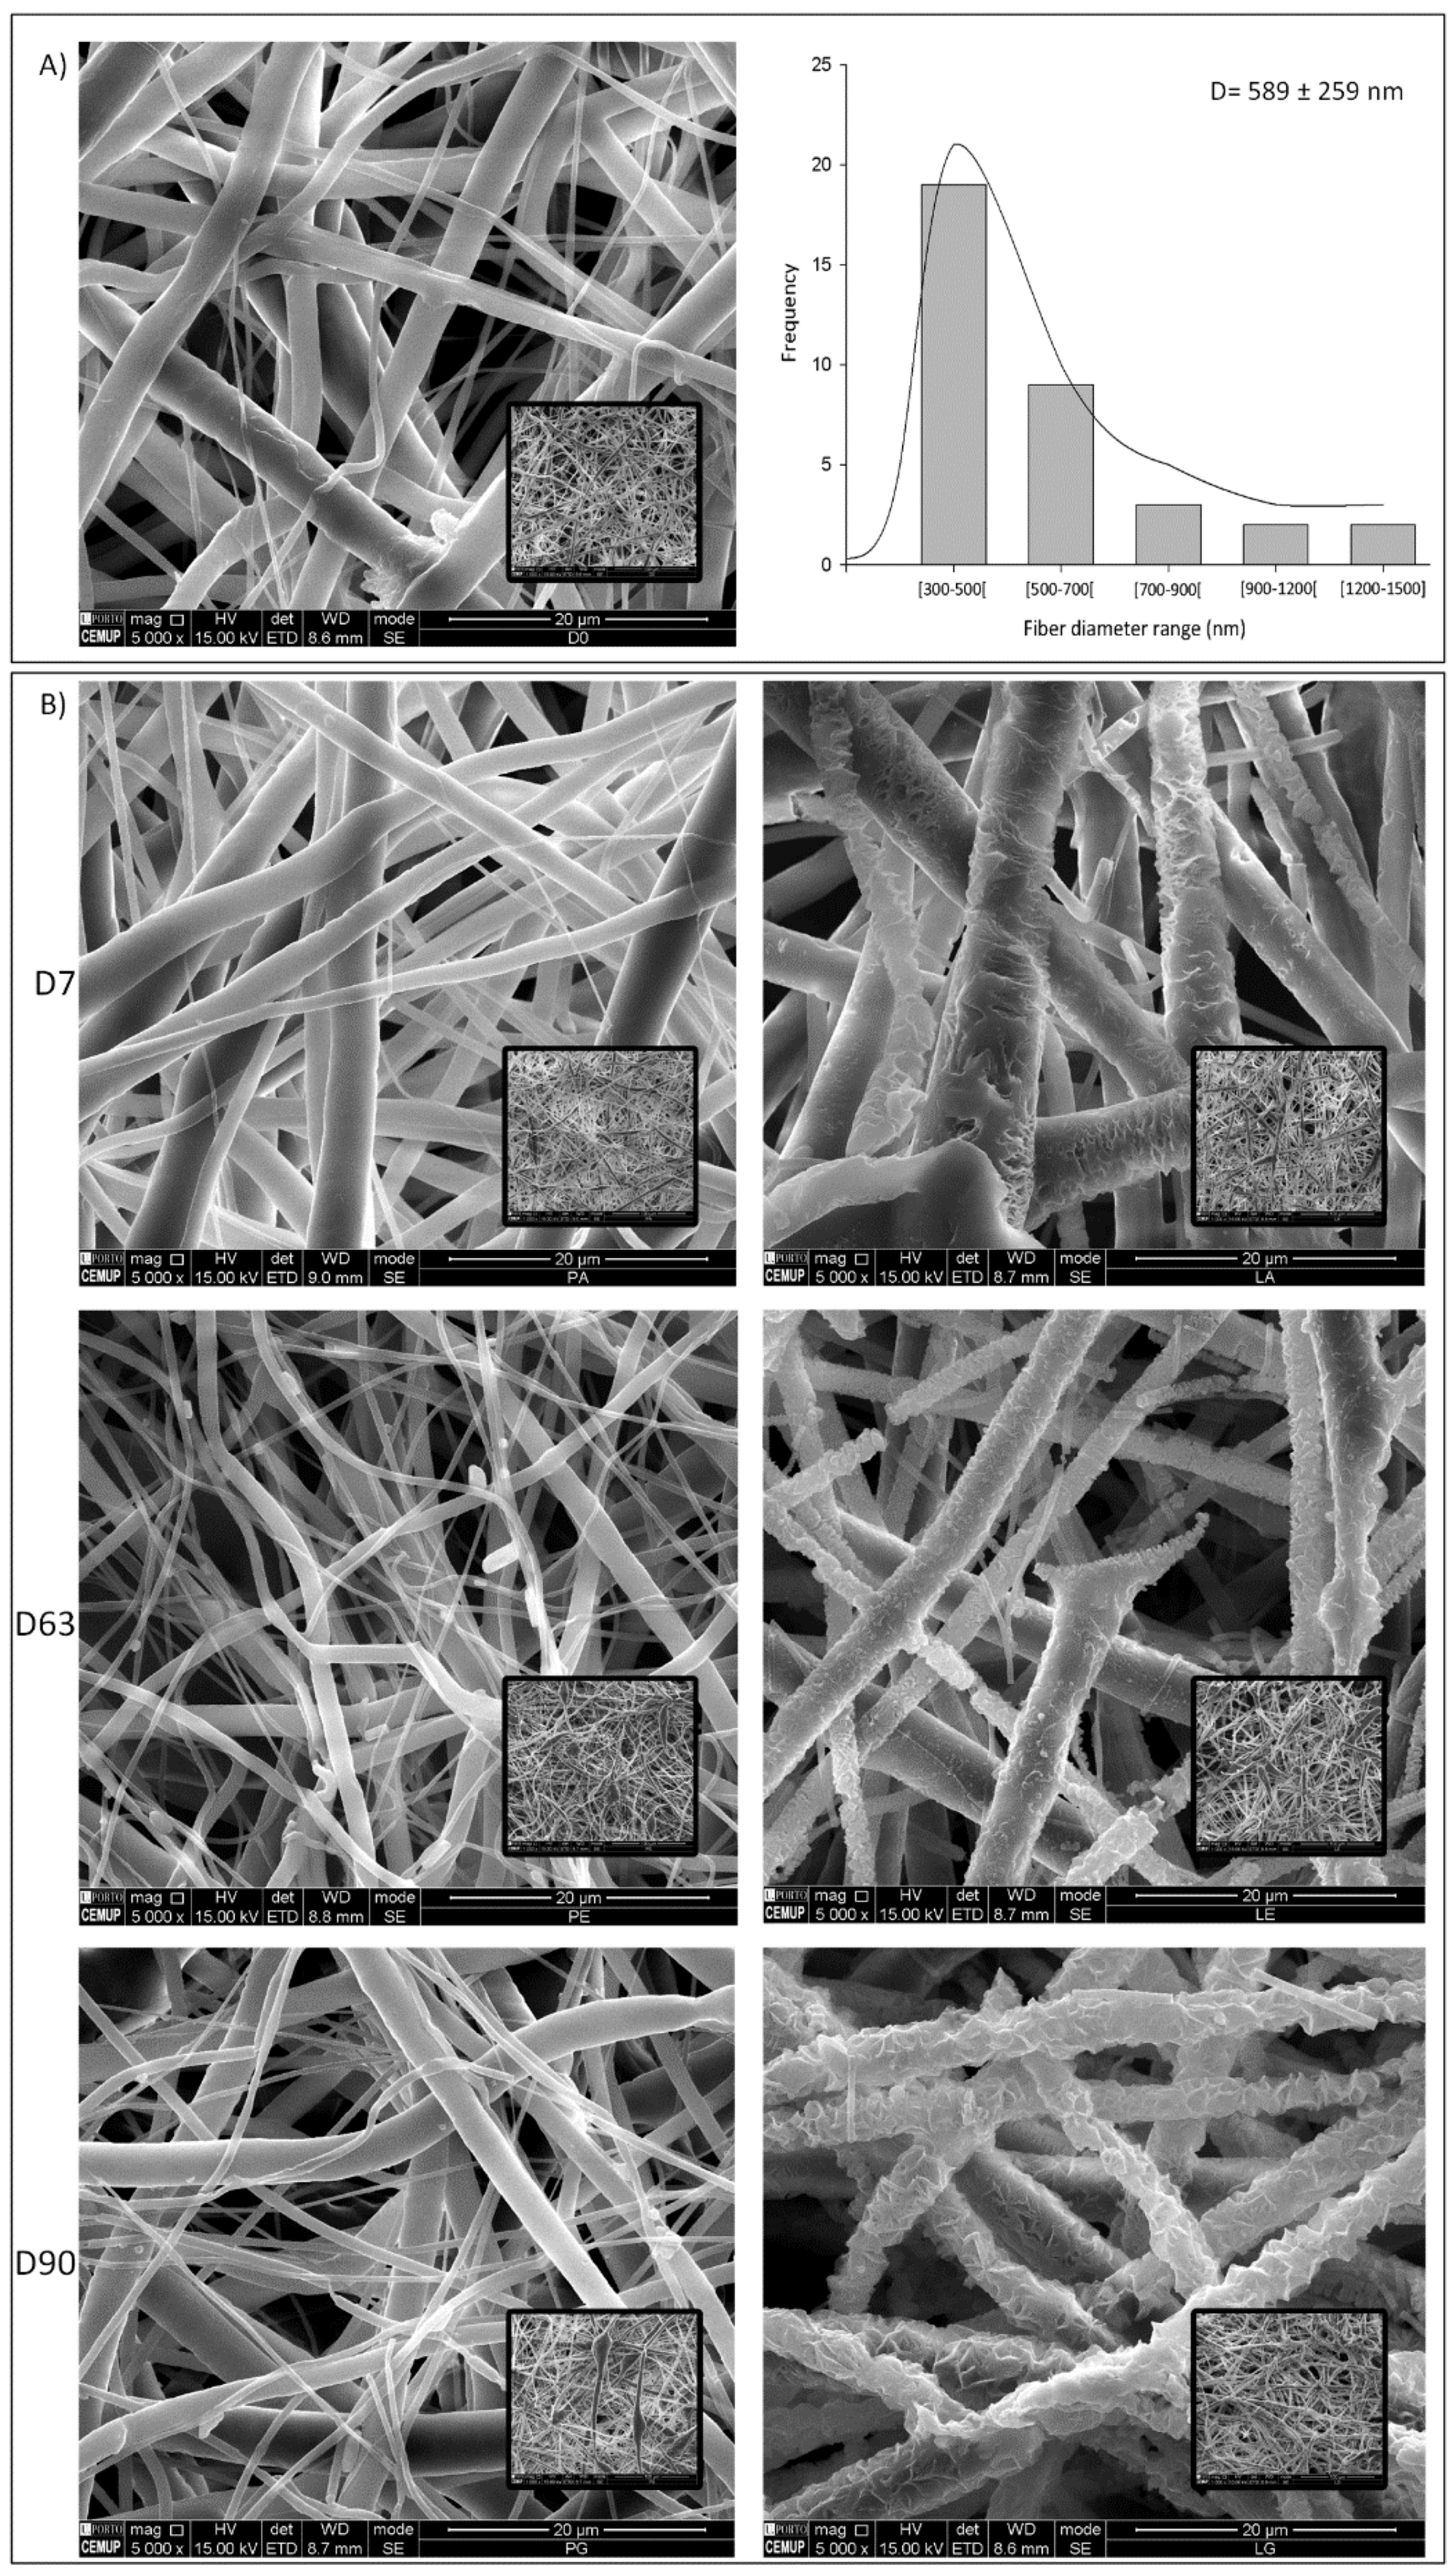 Polymers | Free Full-Text | Electrospun Polycaprolactone (PCL) Degradation:  An In Vitro and In Vivo Study